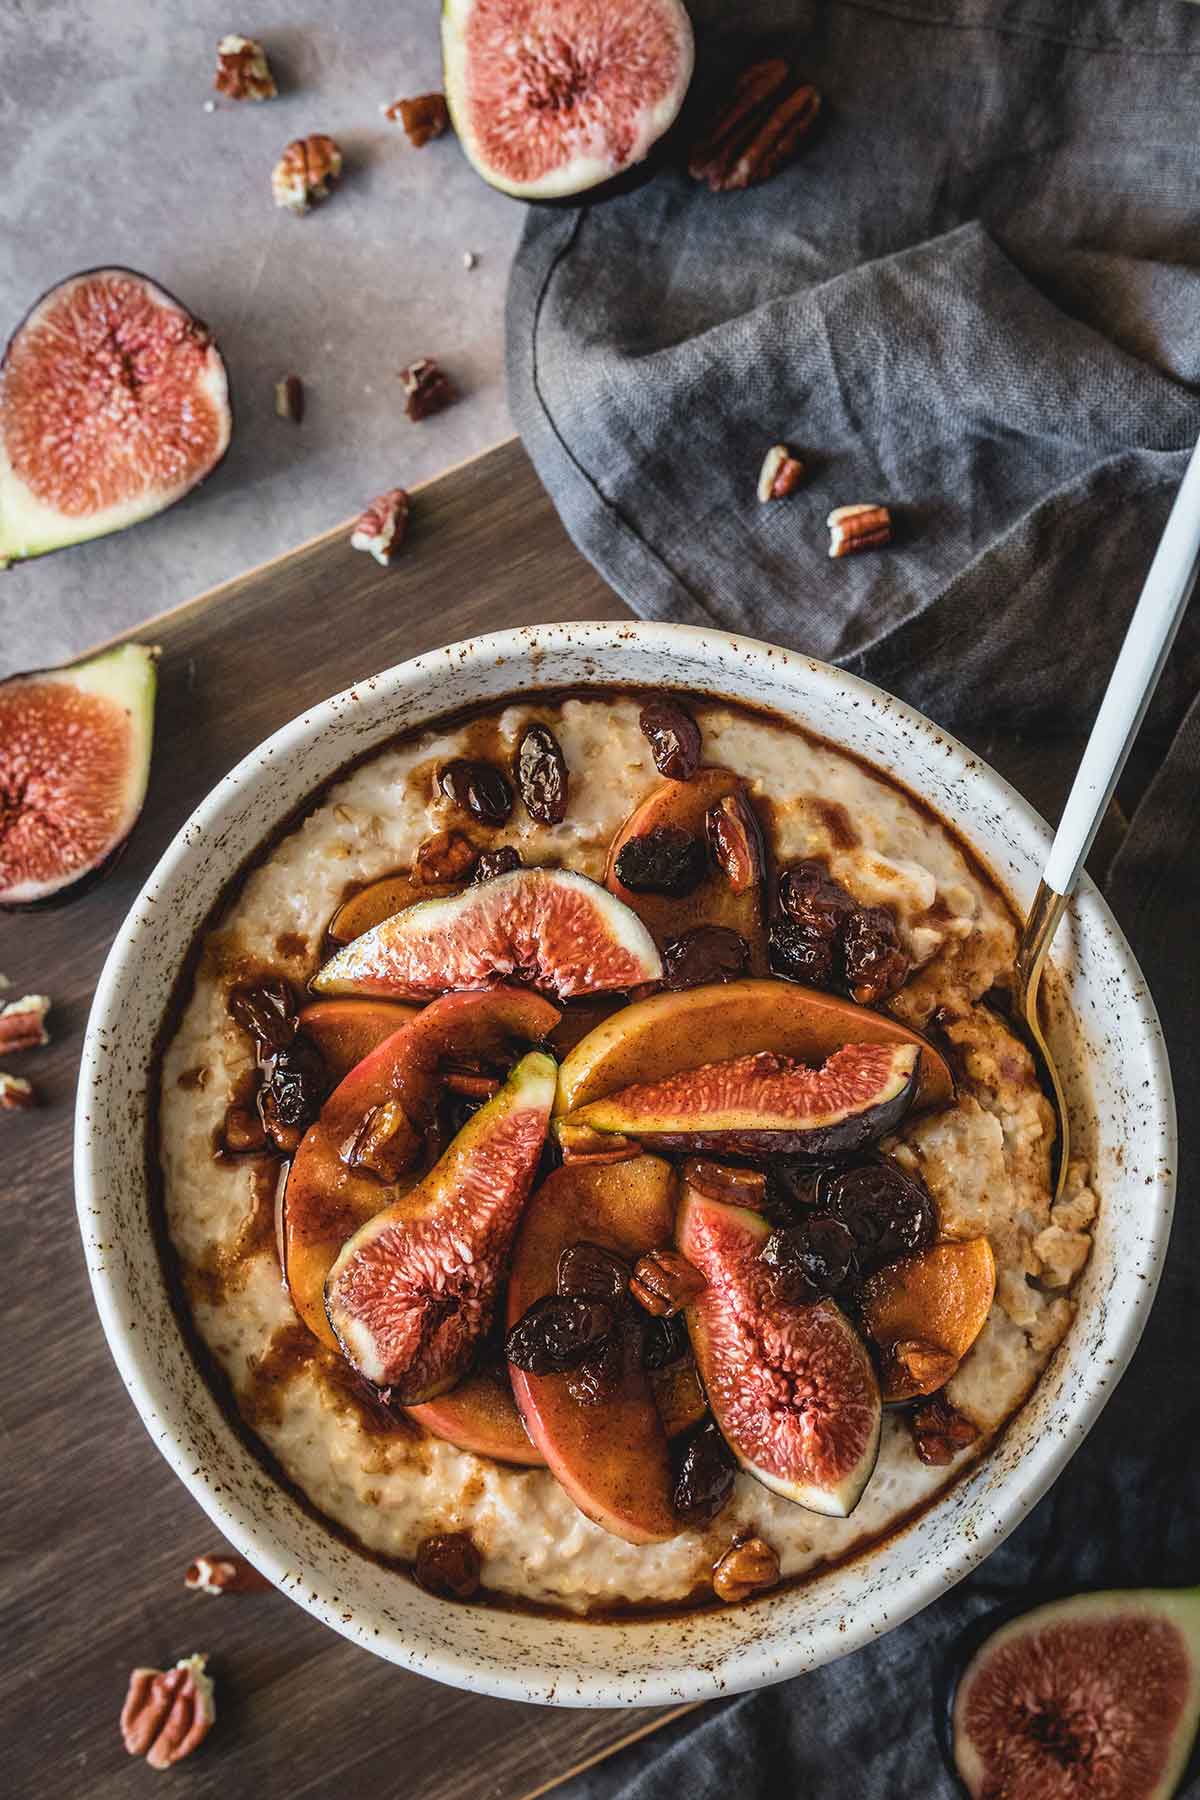 Caramelized apple oatmeal with figs